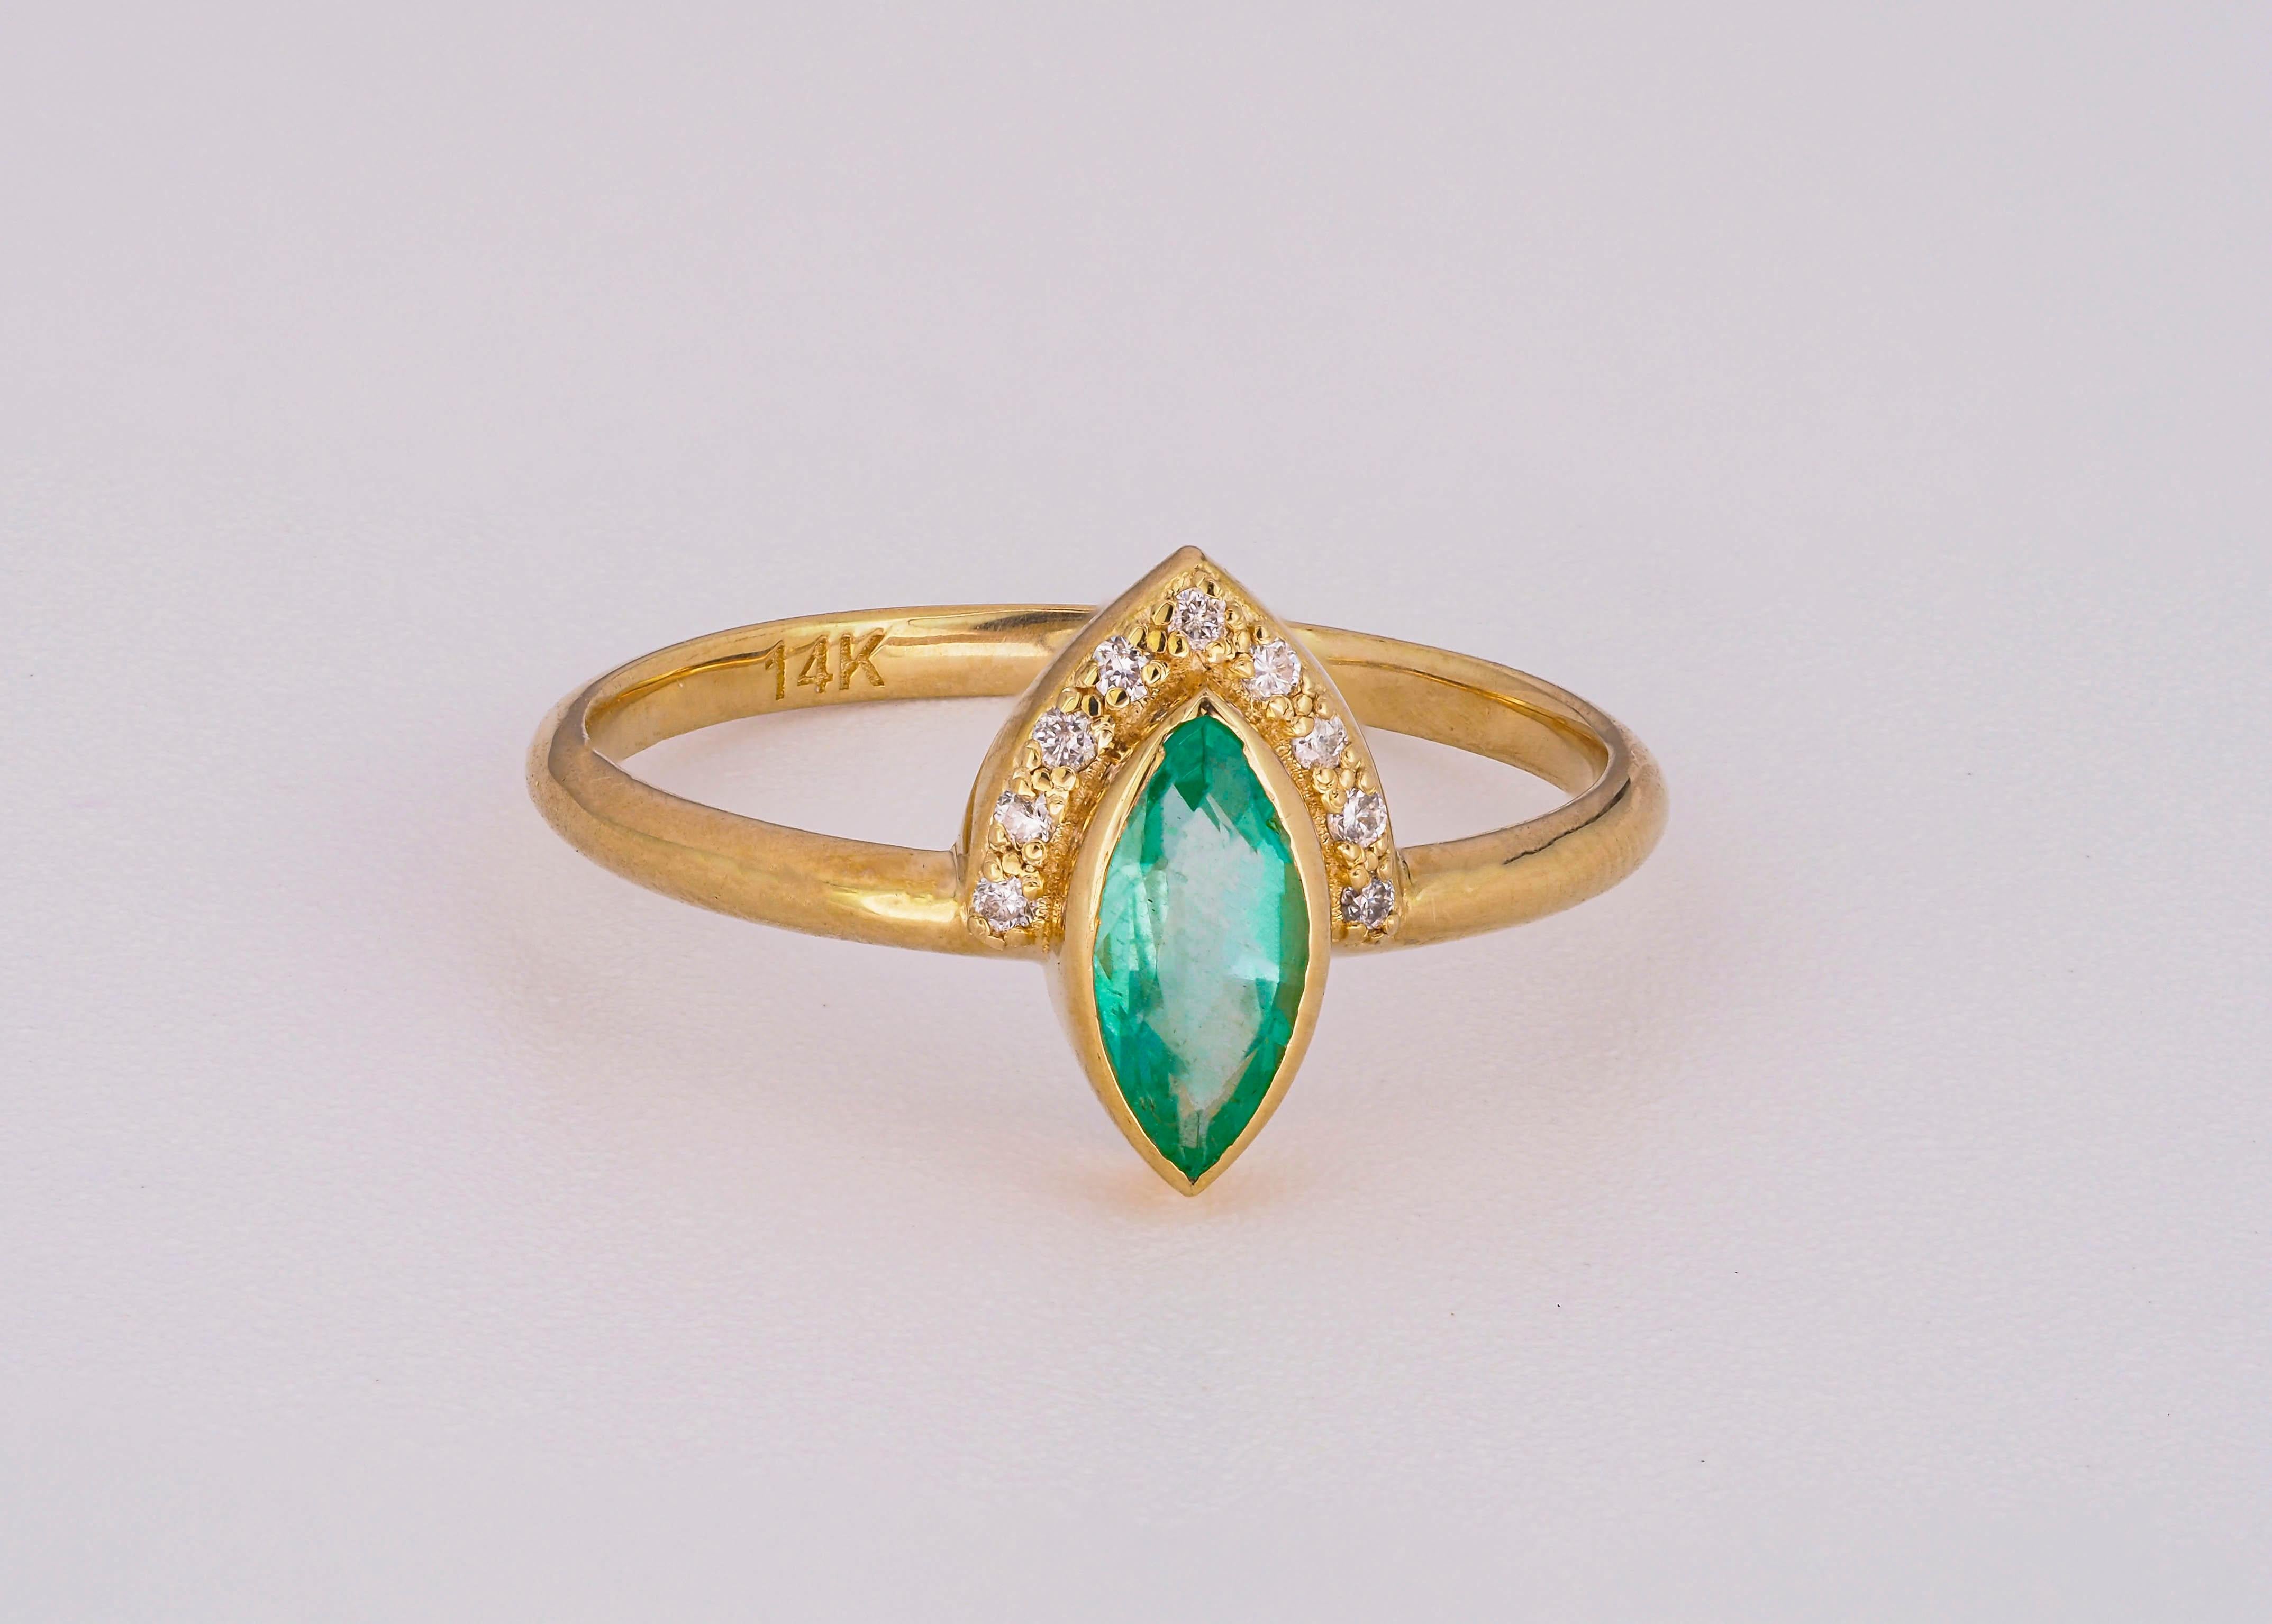 For Sale:  14 K Gold Ring with Marquise Cut Emerald and Diamonds 15